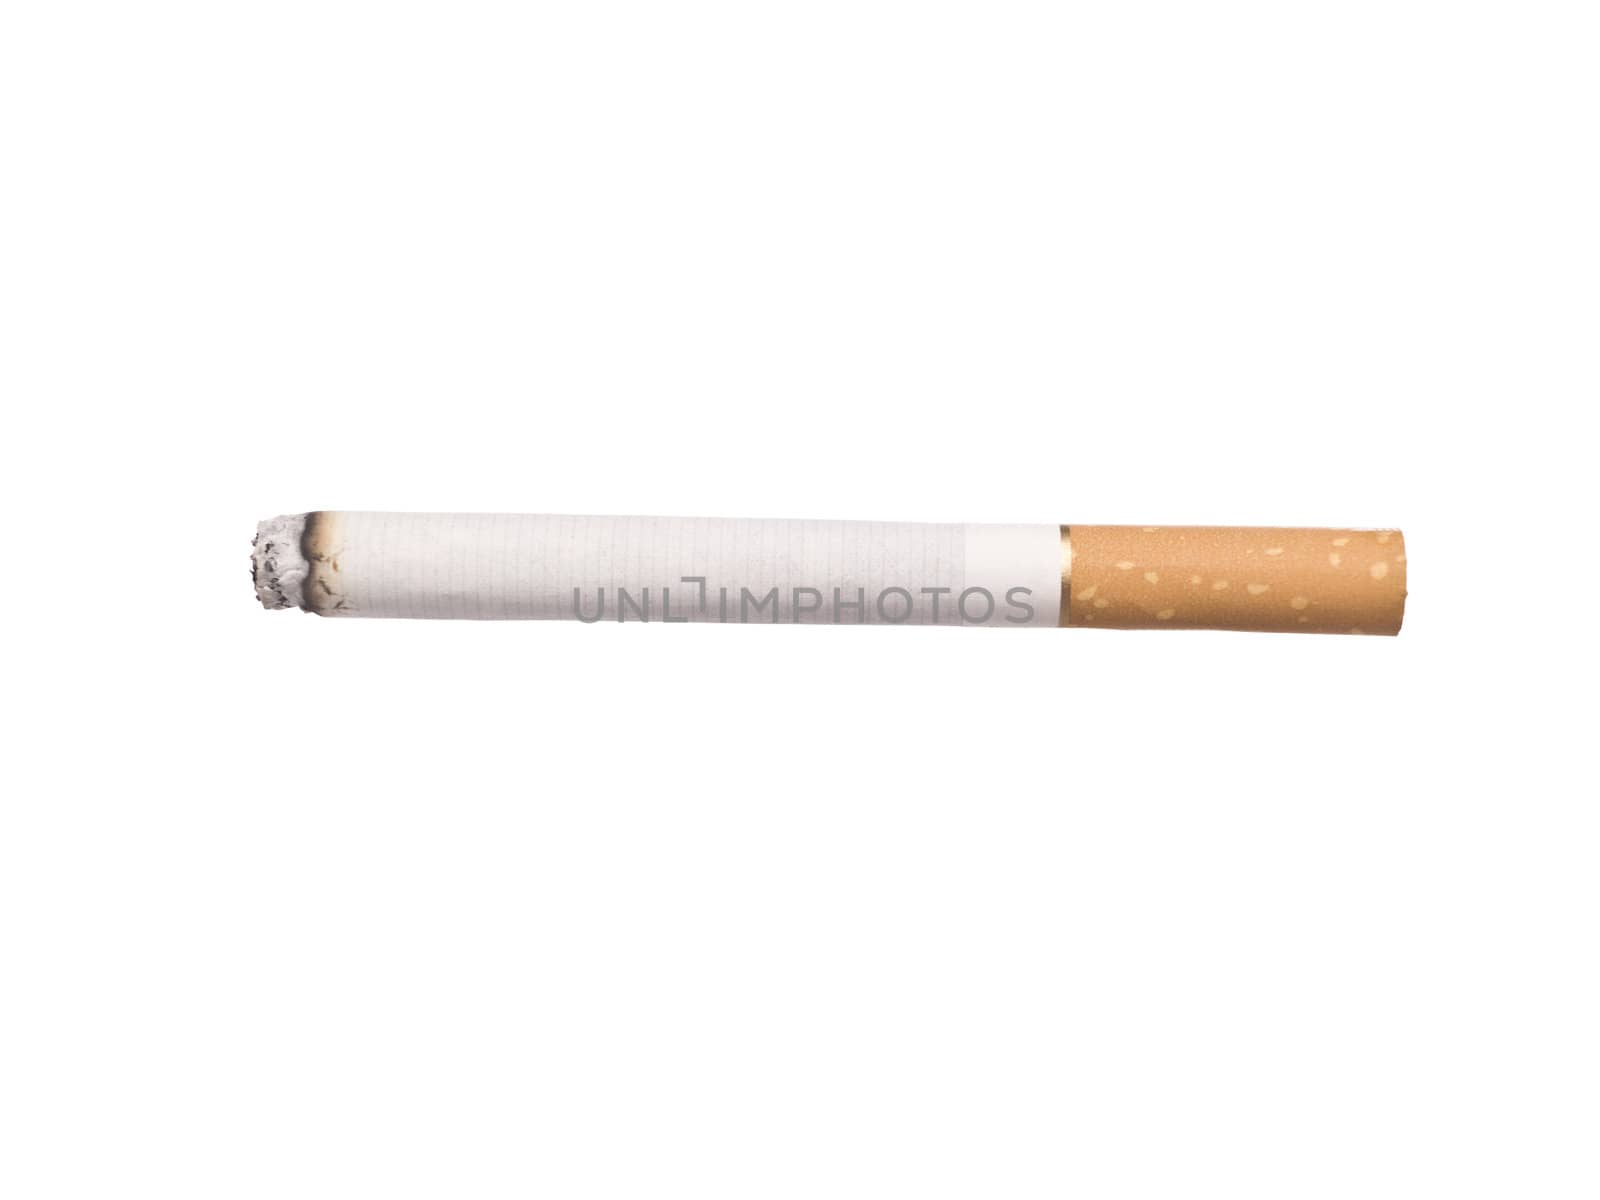 Lit cigarette isolated on a white background